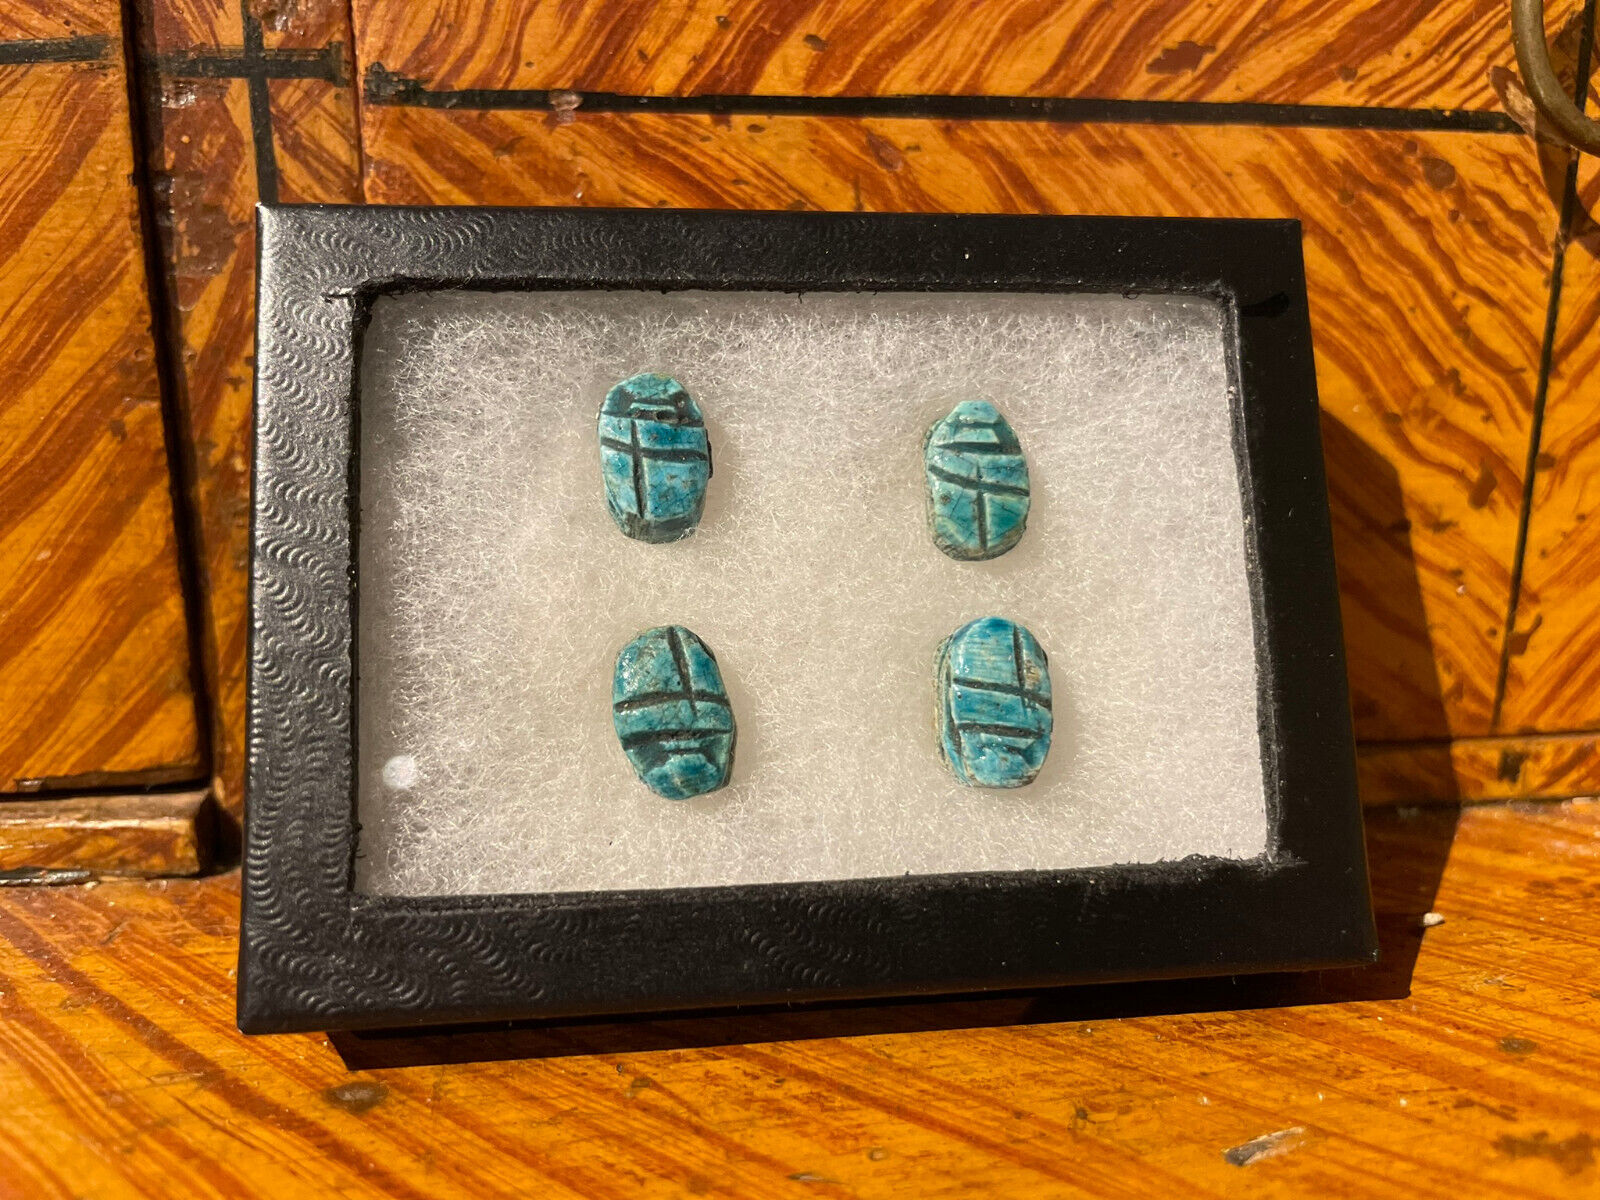 4 ANCIENT EGYPTIAN TURQUOISE GLAZED FAIENCE SCARABS 600 - 300 B.C  ESTATE FOUND